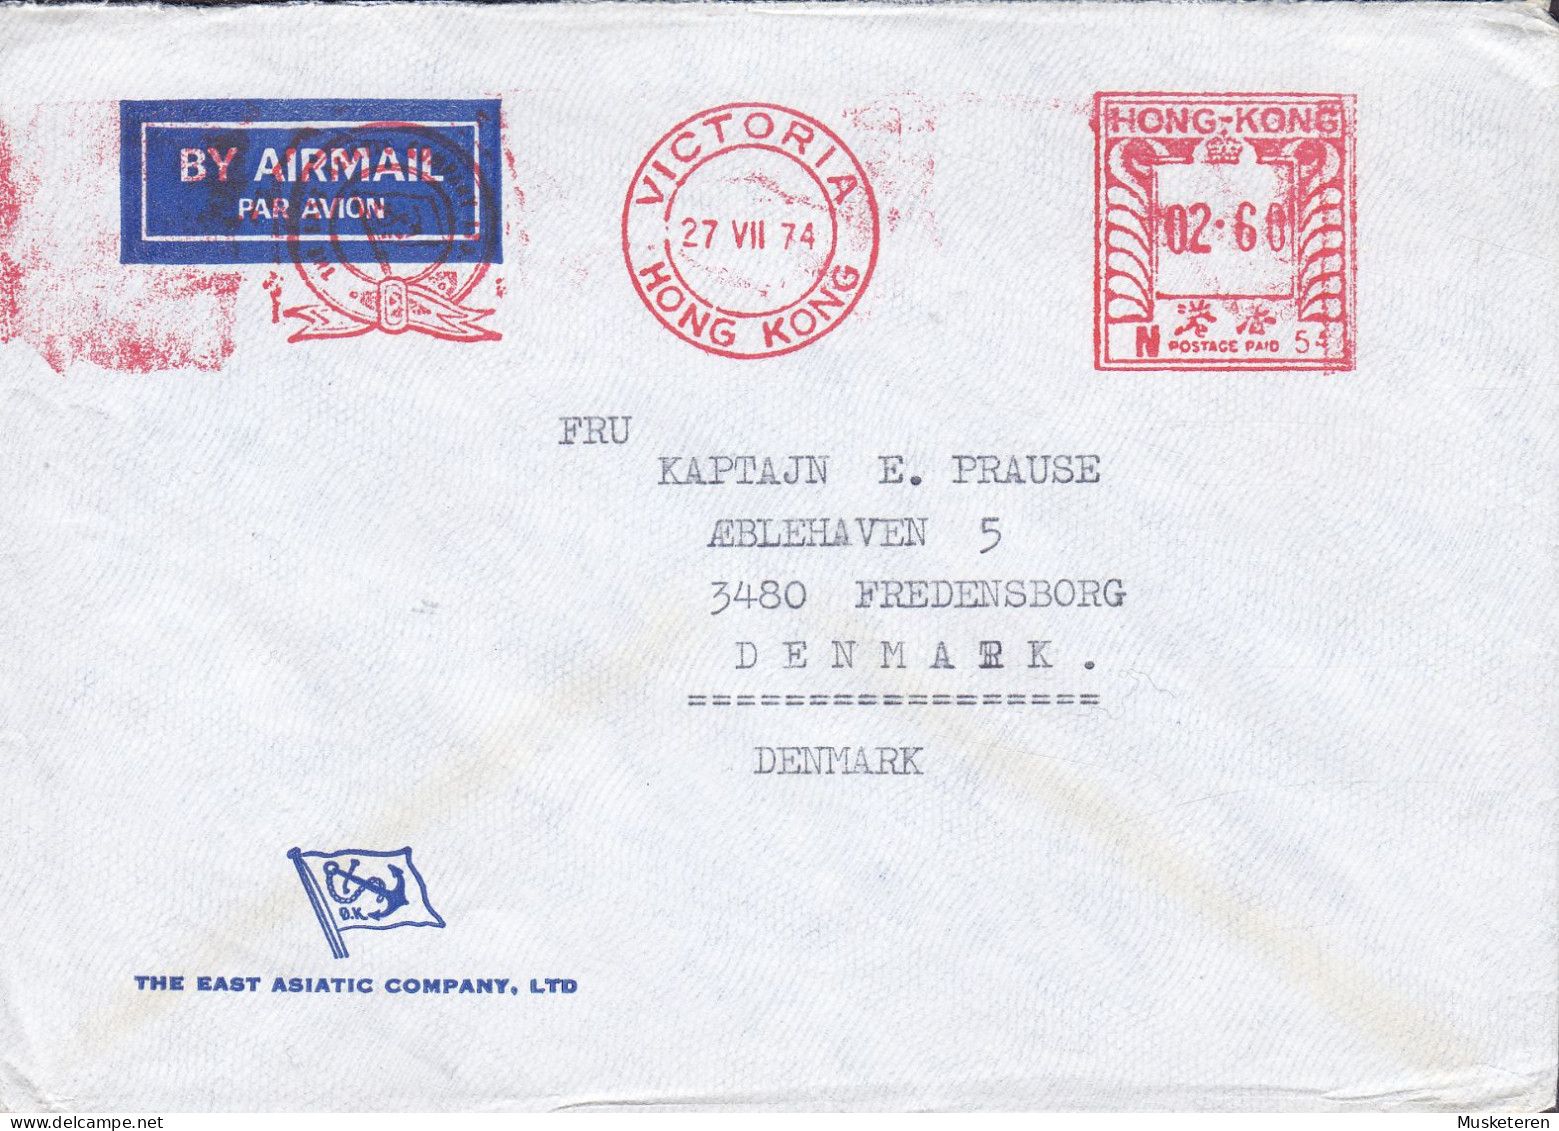 Hong Kong Captain M/S 'JUTLANDIA' THE EAST ASIATIC COMPANY, VICTORIA 1974 Meter Ships Mail Cover FREDENSBORG Denmark - Covers & Documents